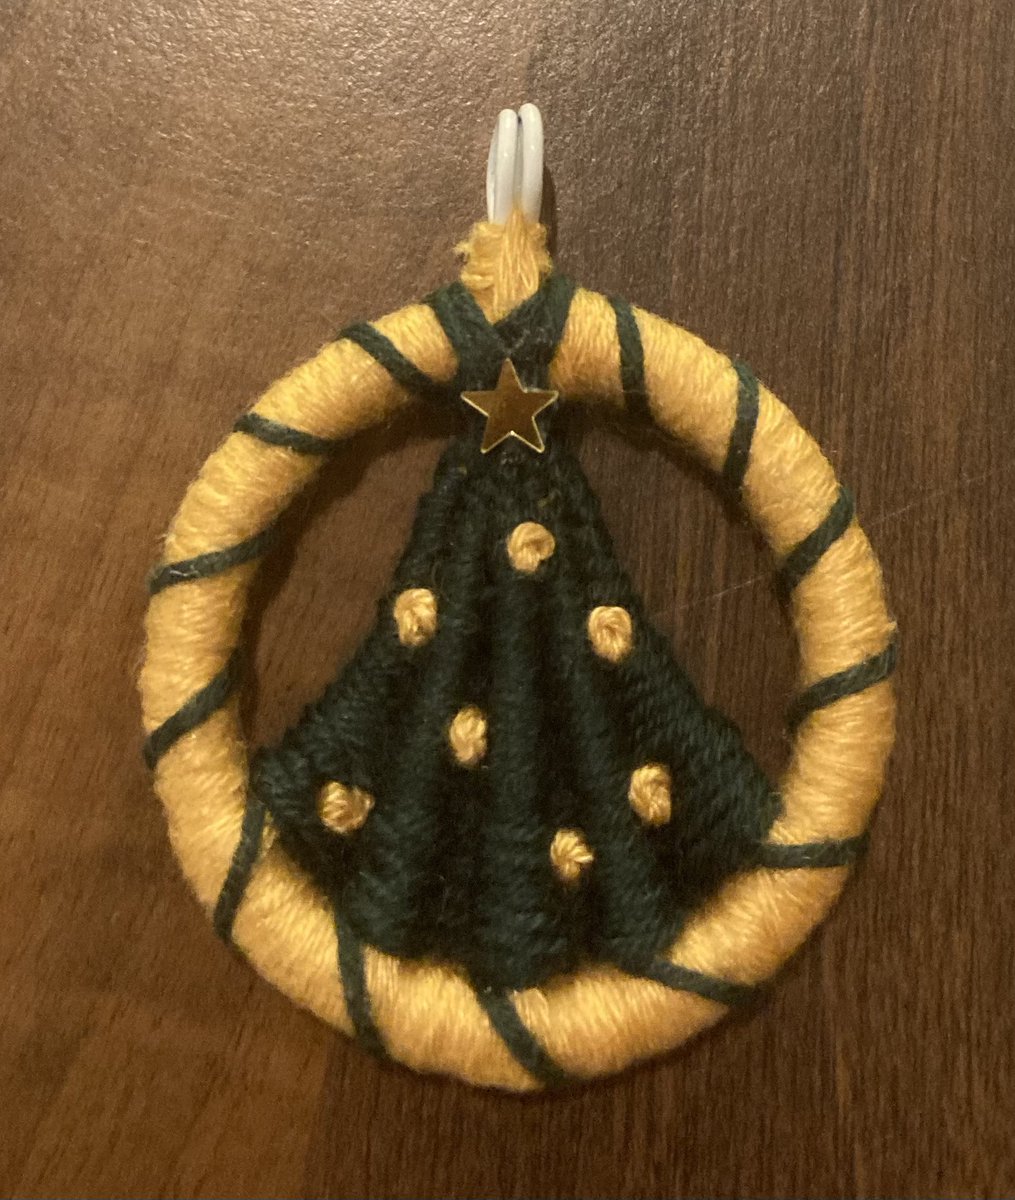 I think I’m getting the hang of this. I’m making several of these in the band’s colours for the board members and conductor.
#dorsetbutton #ornaments